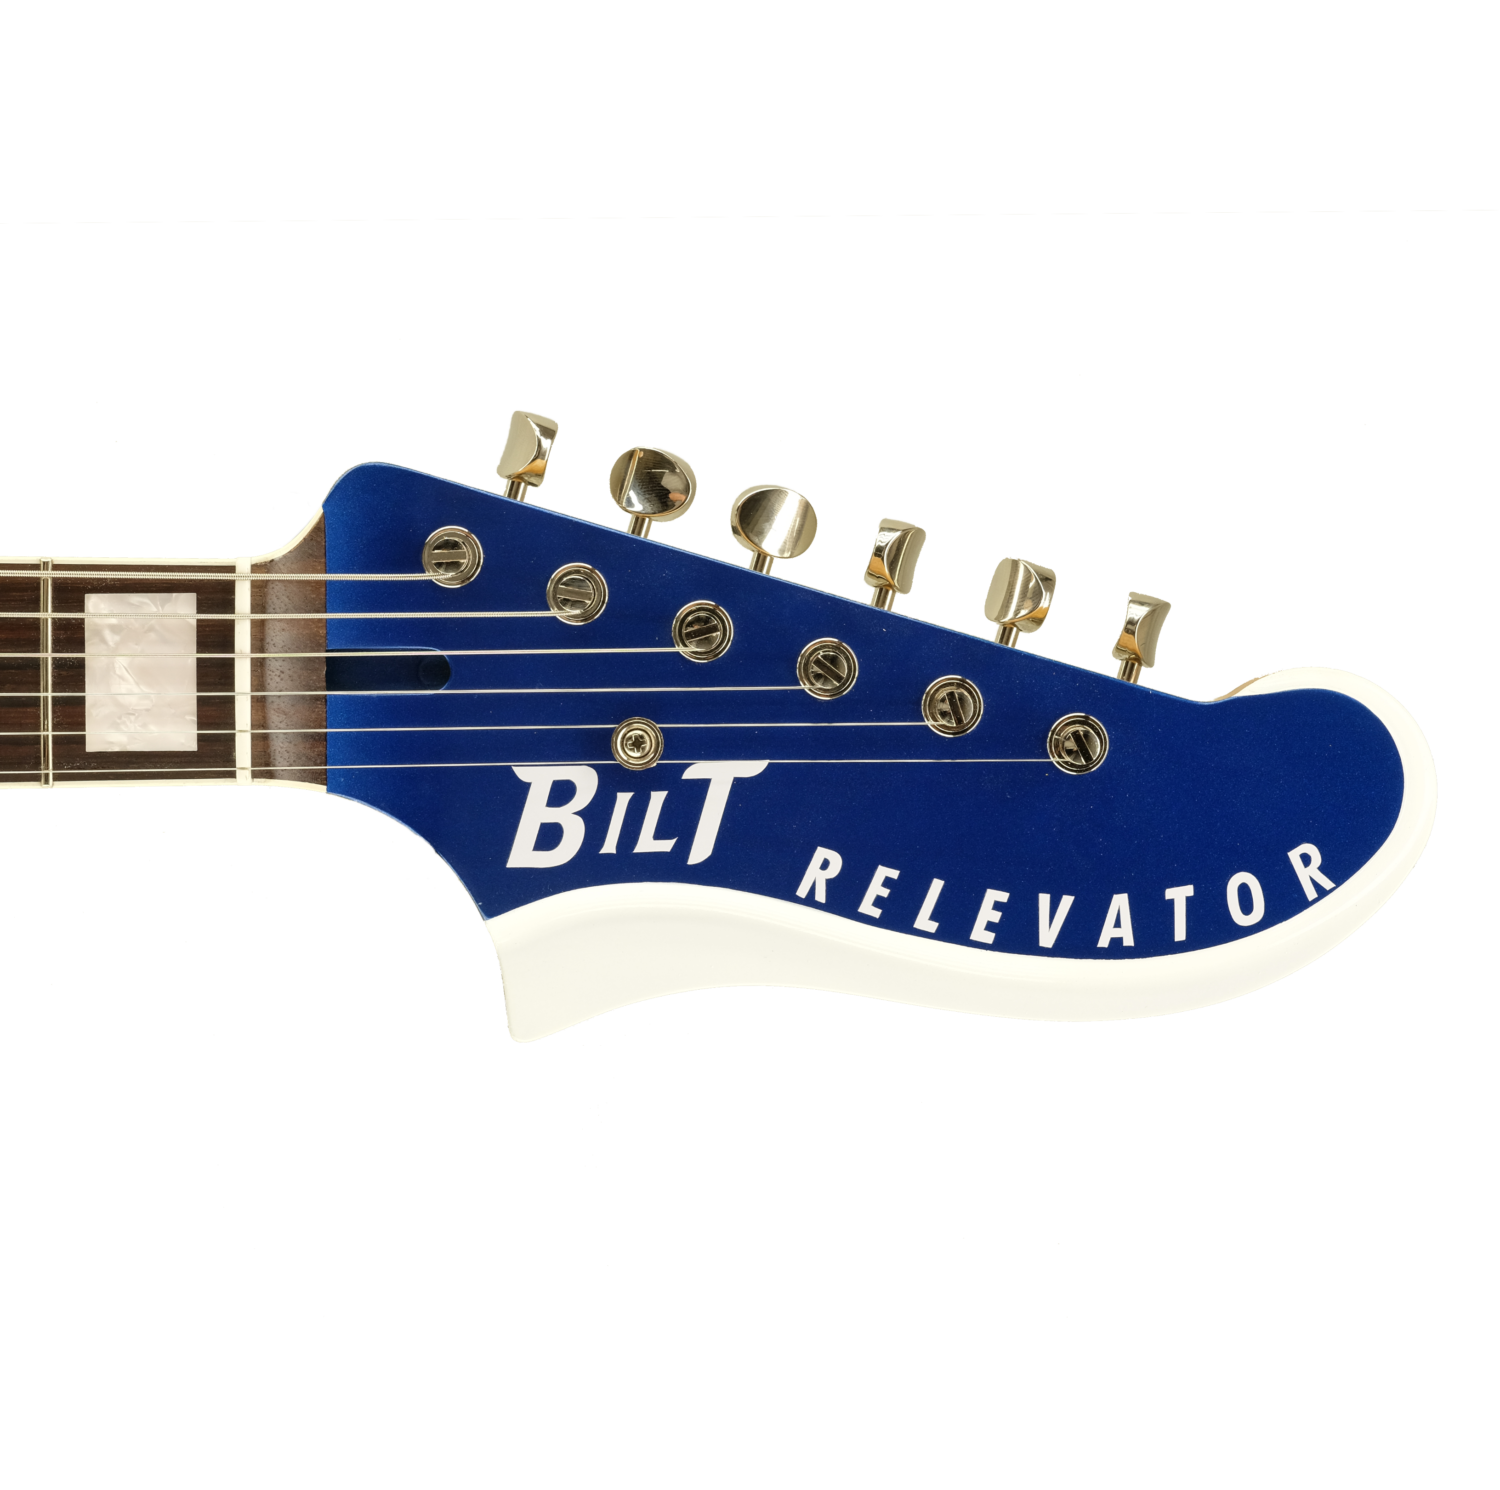 Ford Blue Flame Metallic Relevator+Effects - Headstock